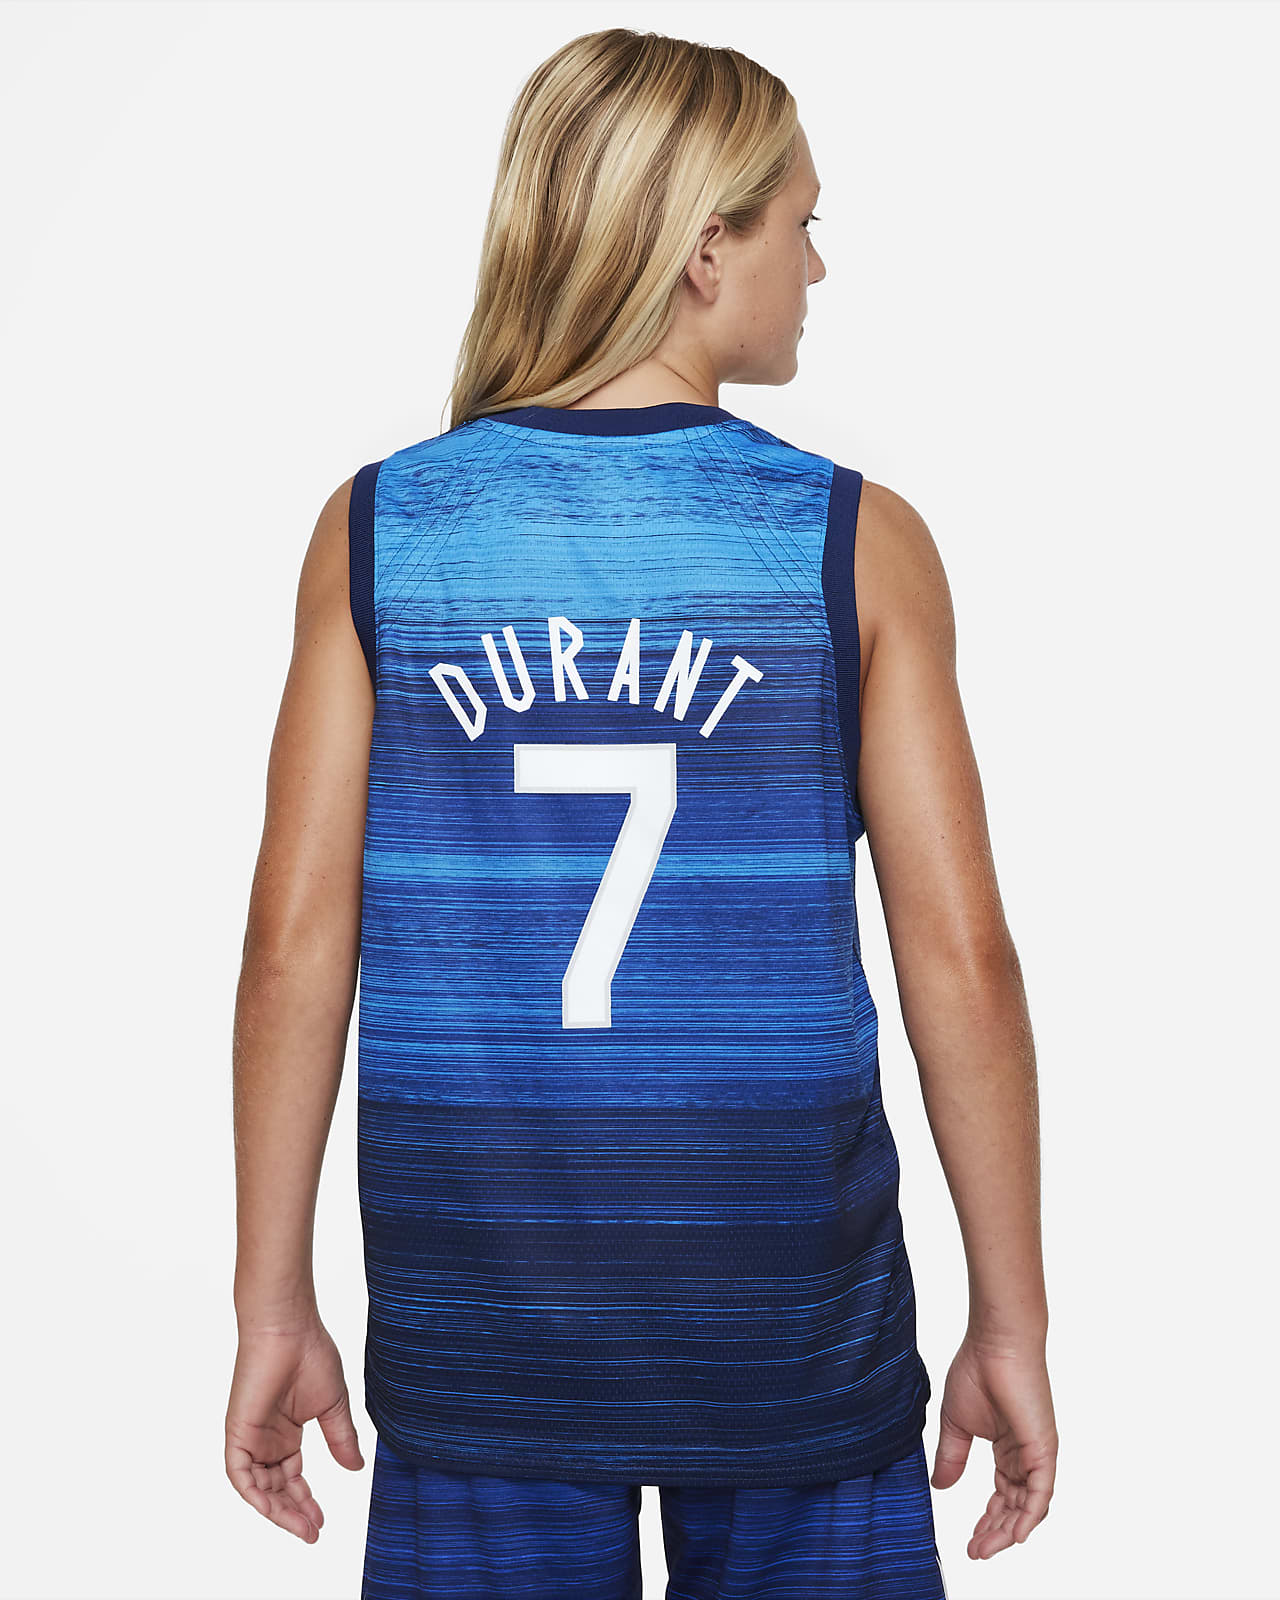 nike kevin durant jersey